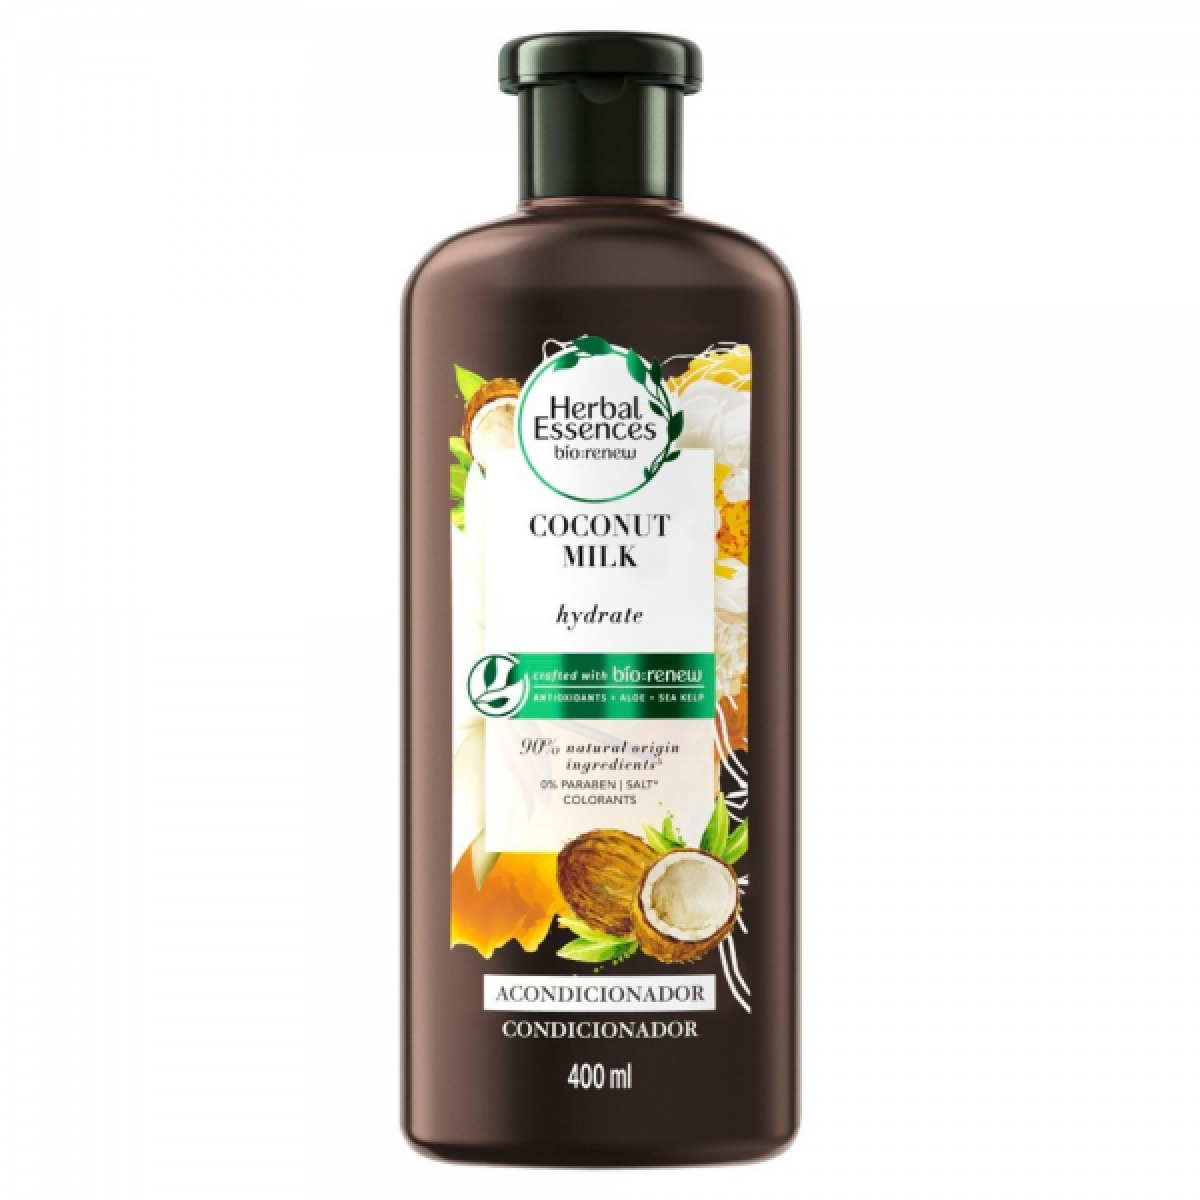 HERB ESS ACOND 400 ML HYDRATE COCO